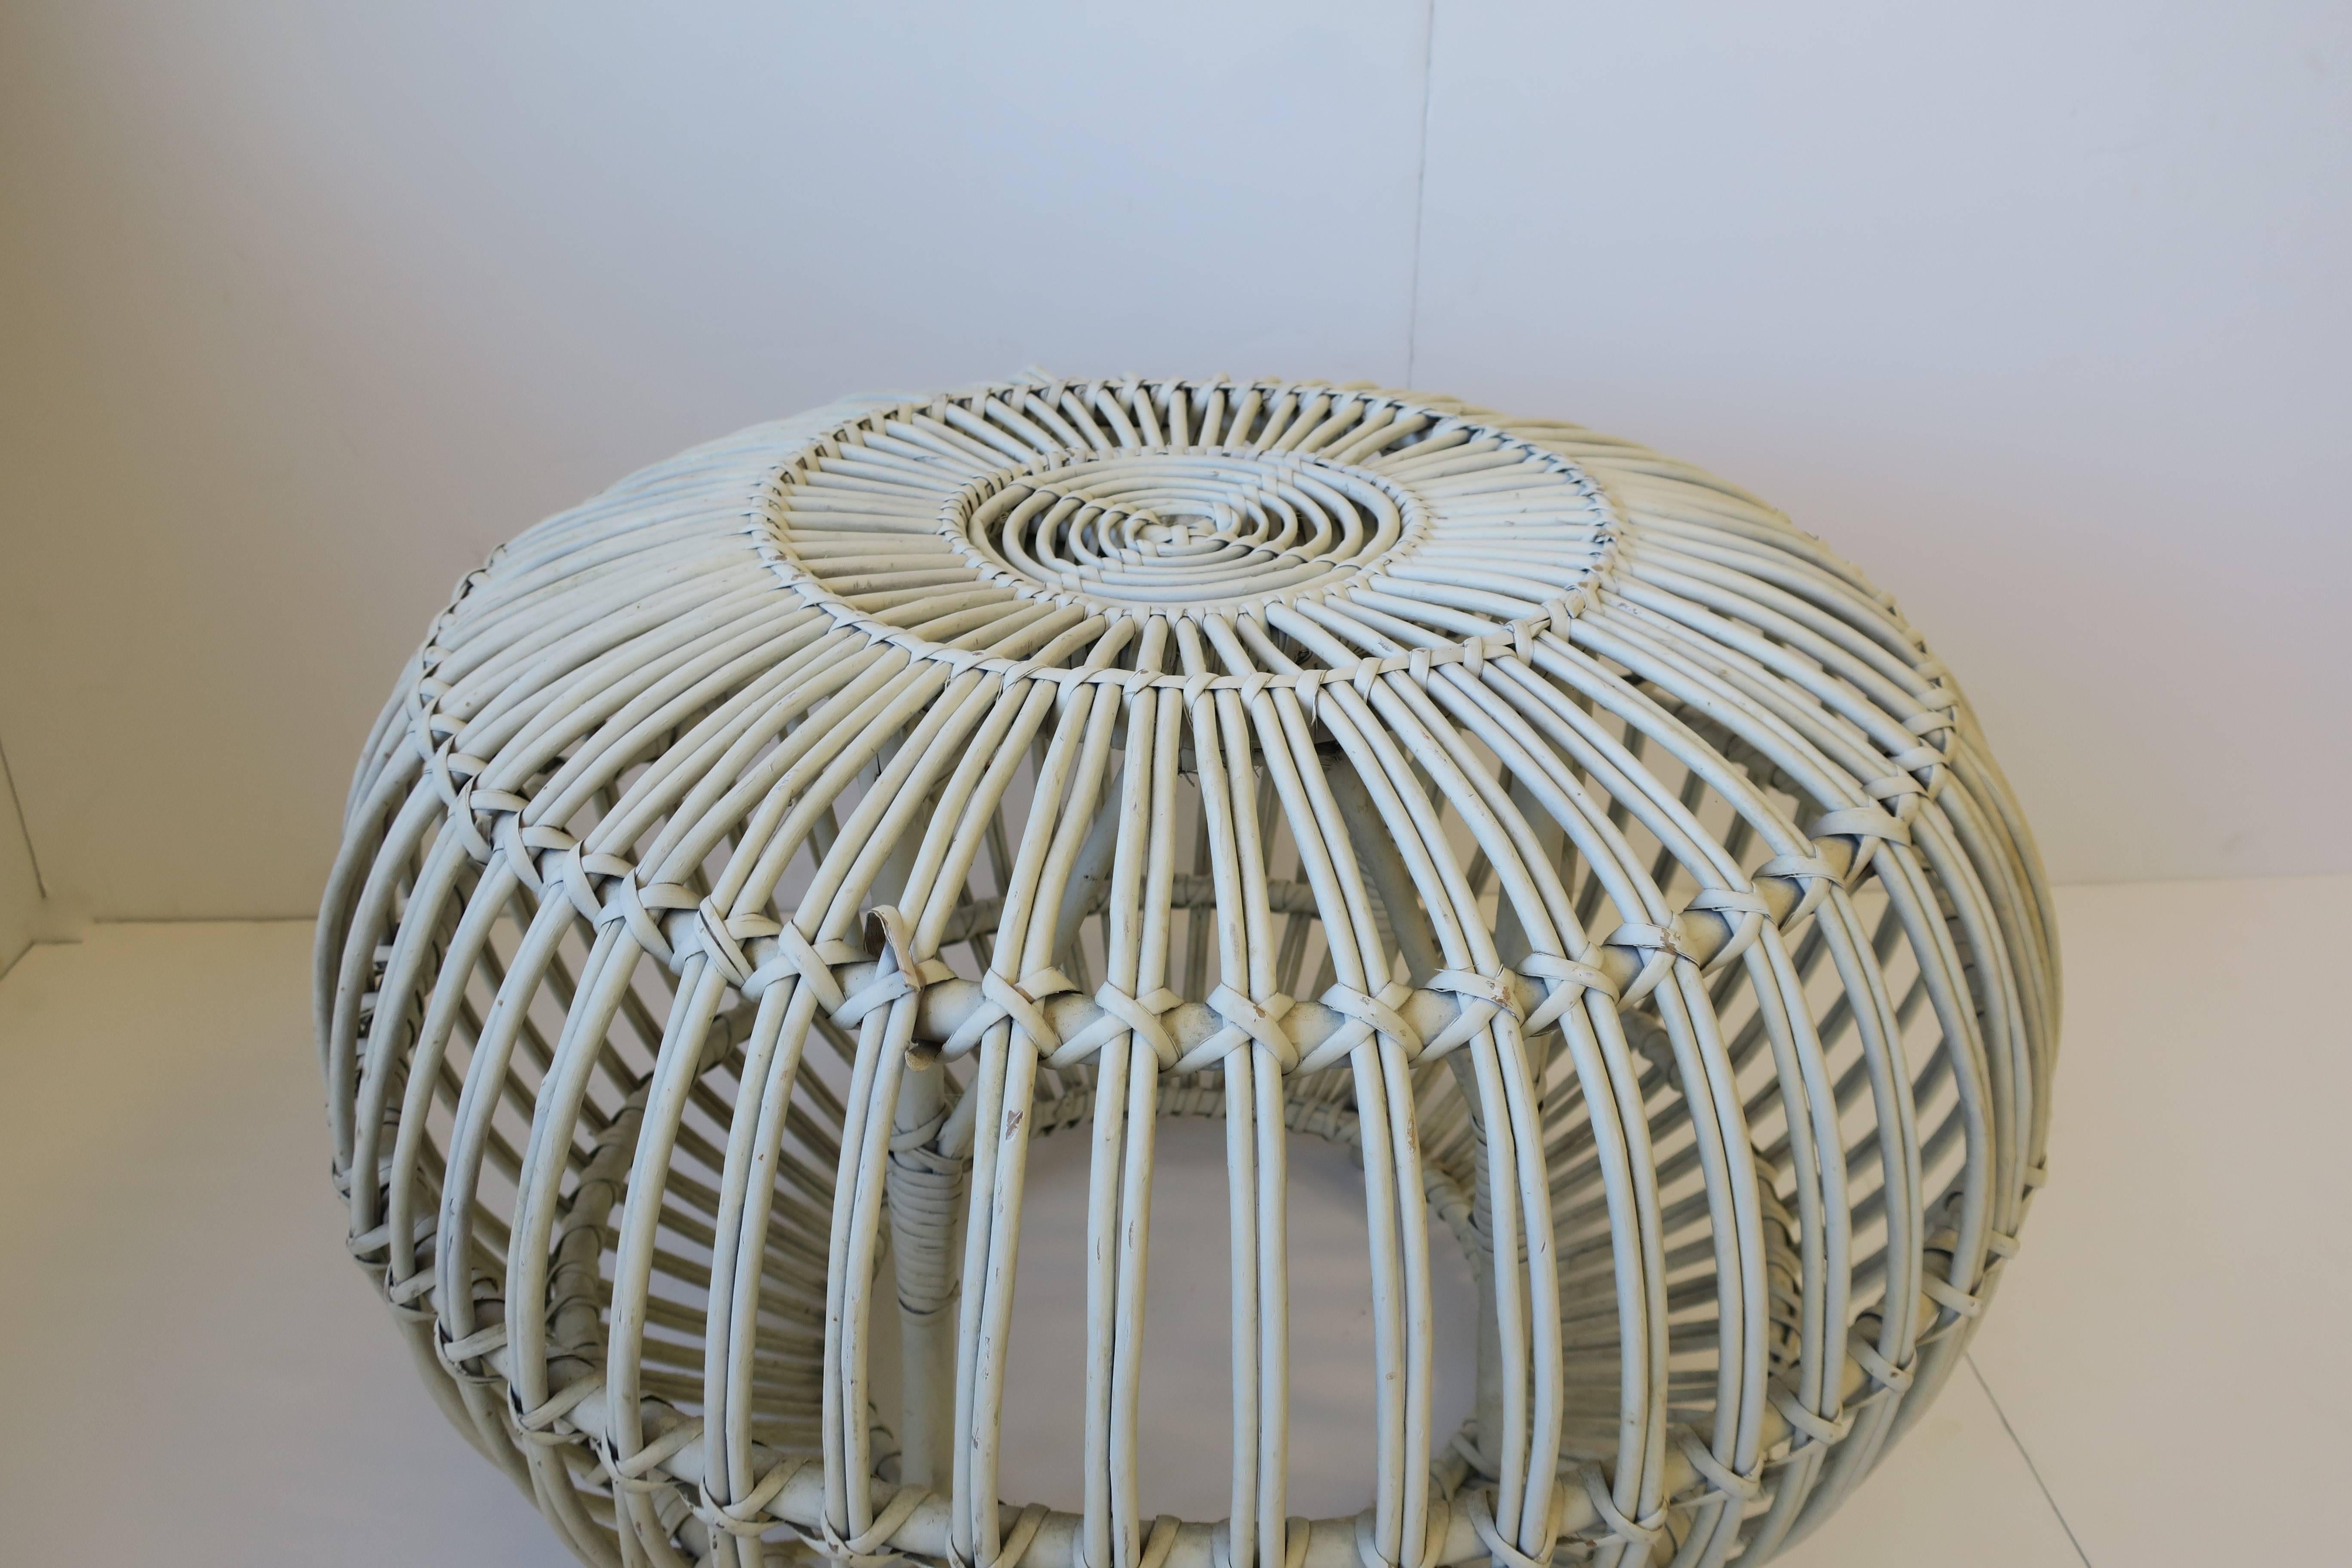 20th Century Midcentury Round White Rattan Stool or Side Table by Franco Albini